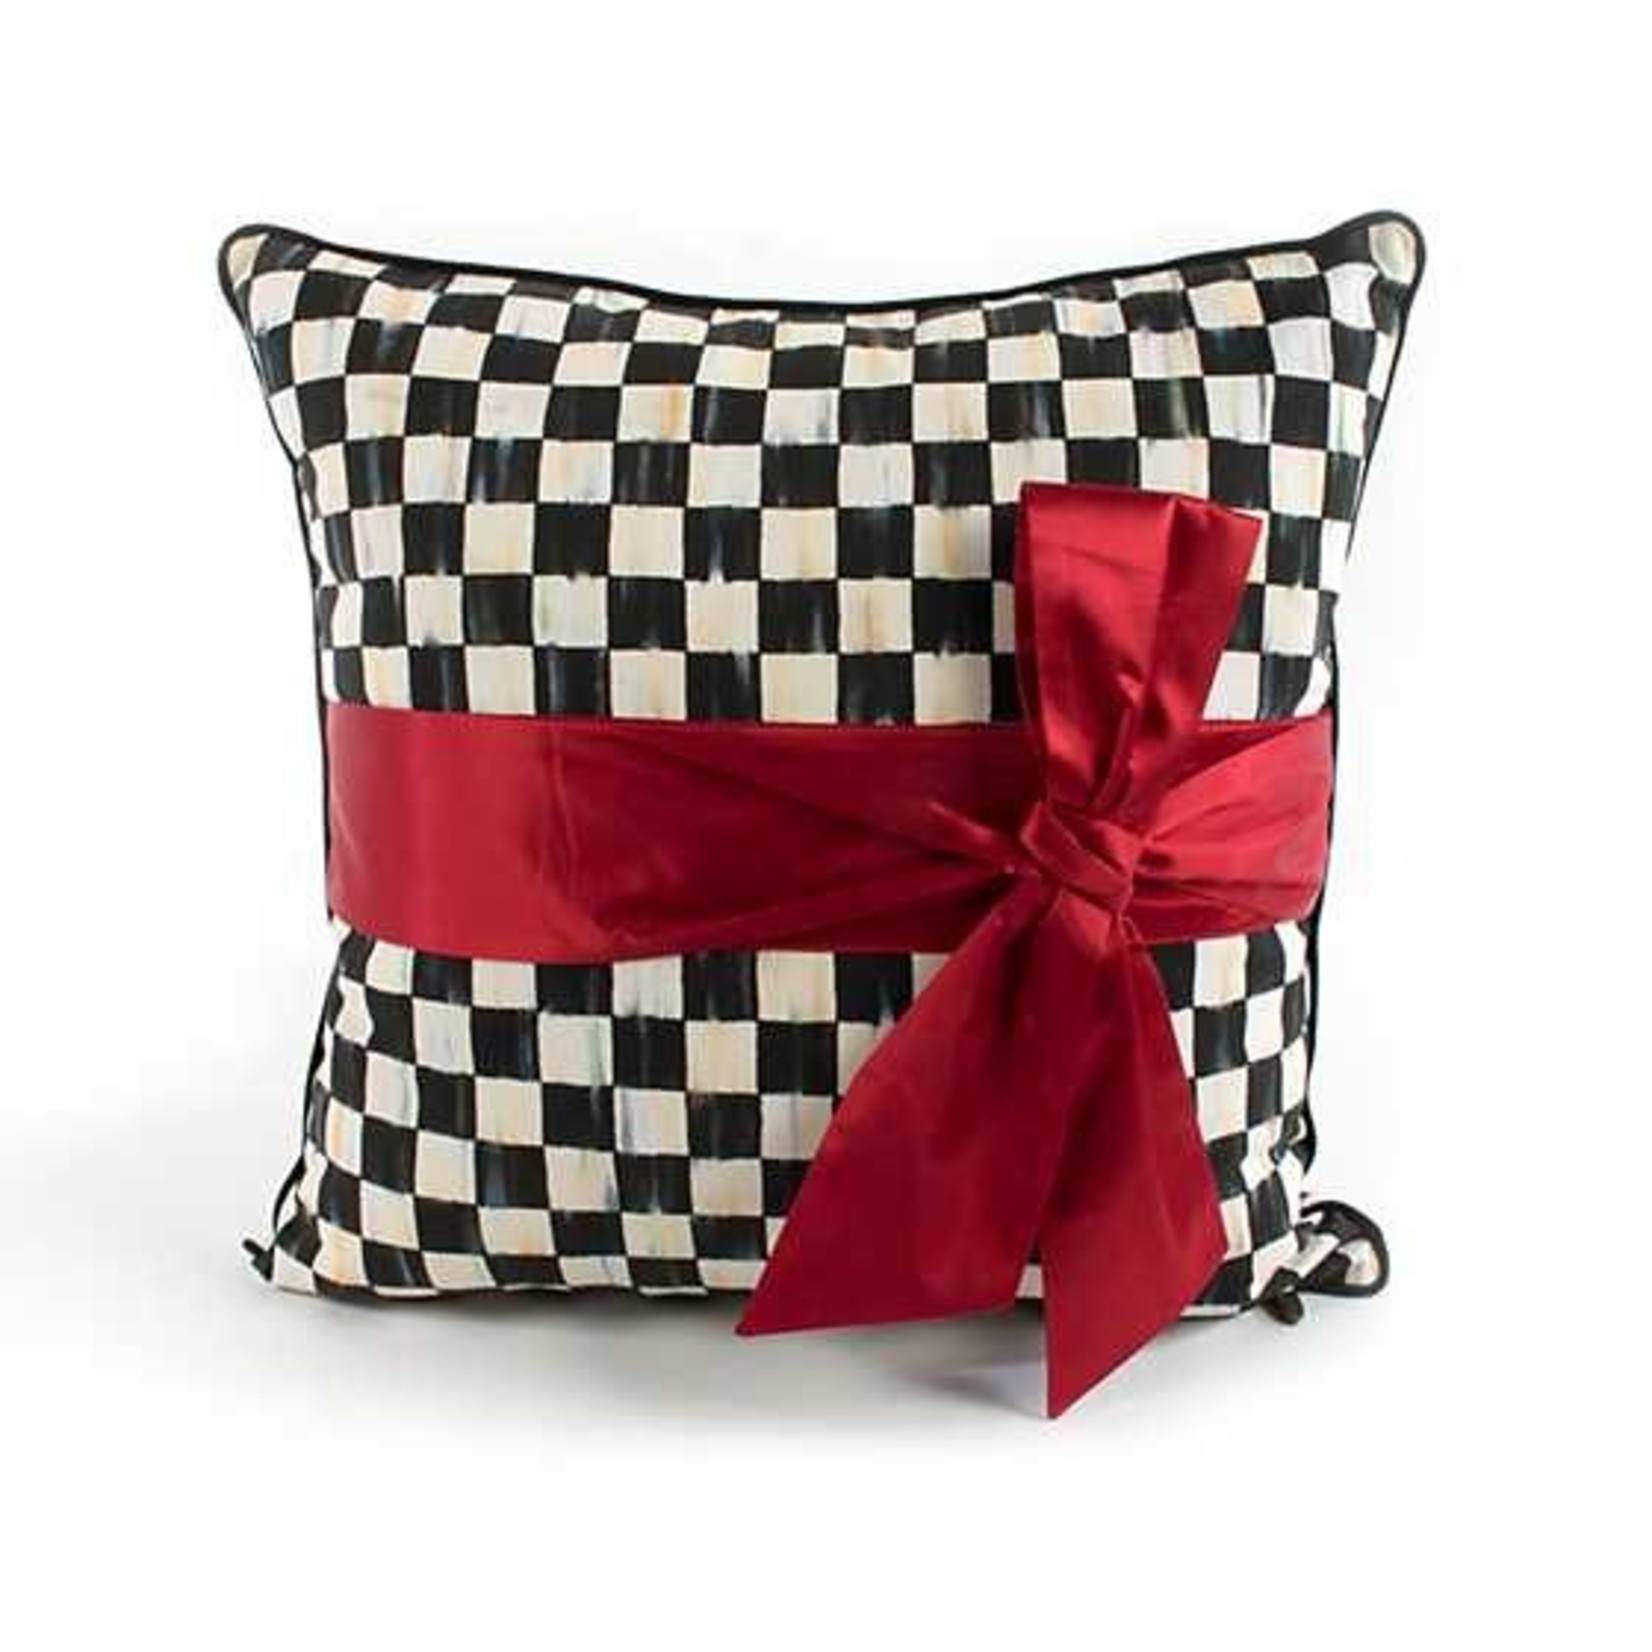 MacKenzie Childs Courtly Check Sash Pillow - Red